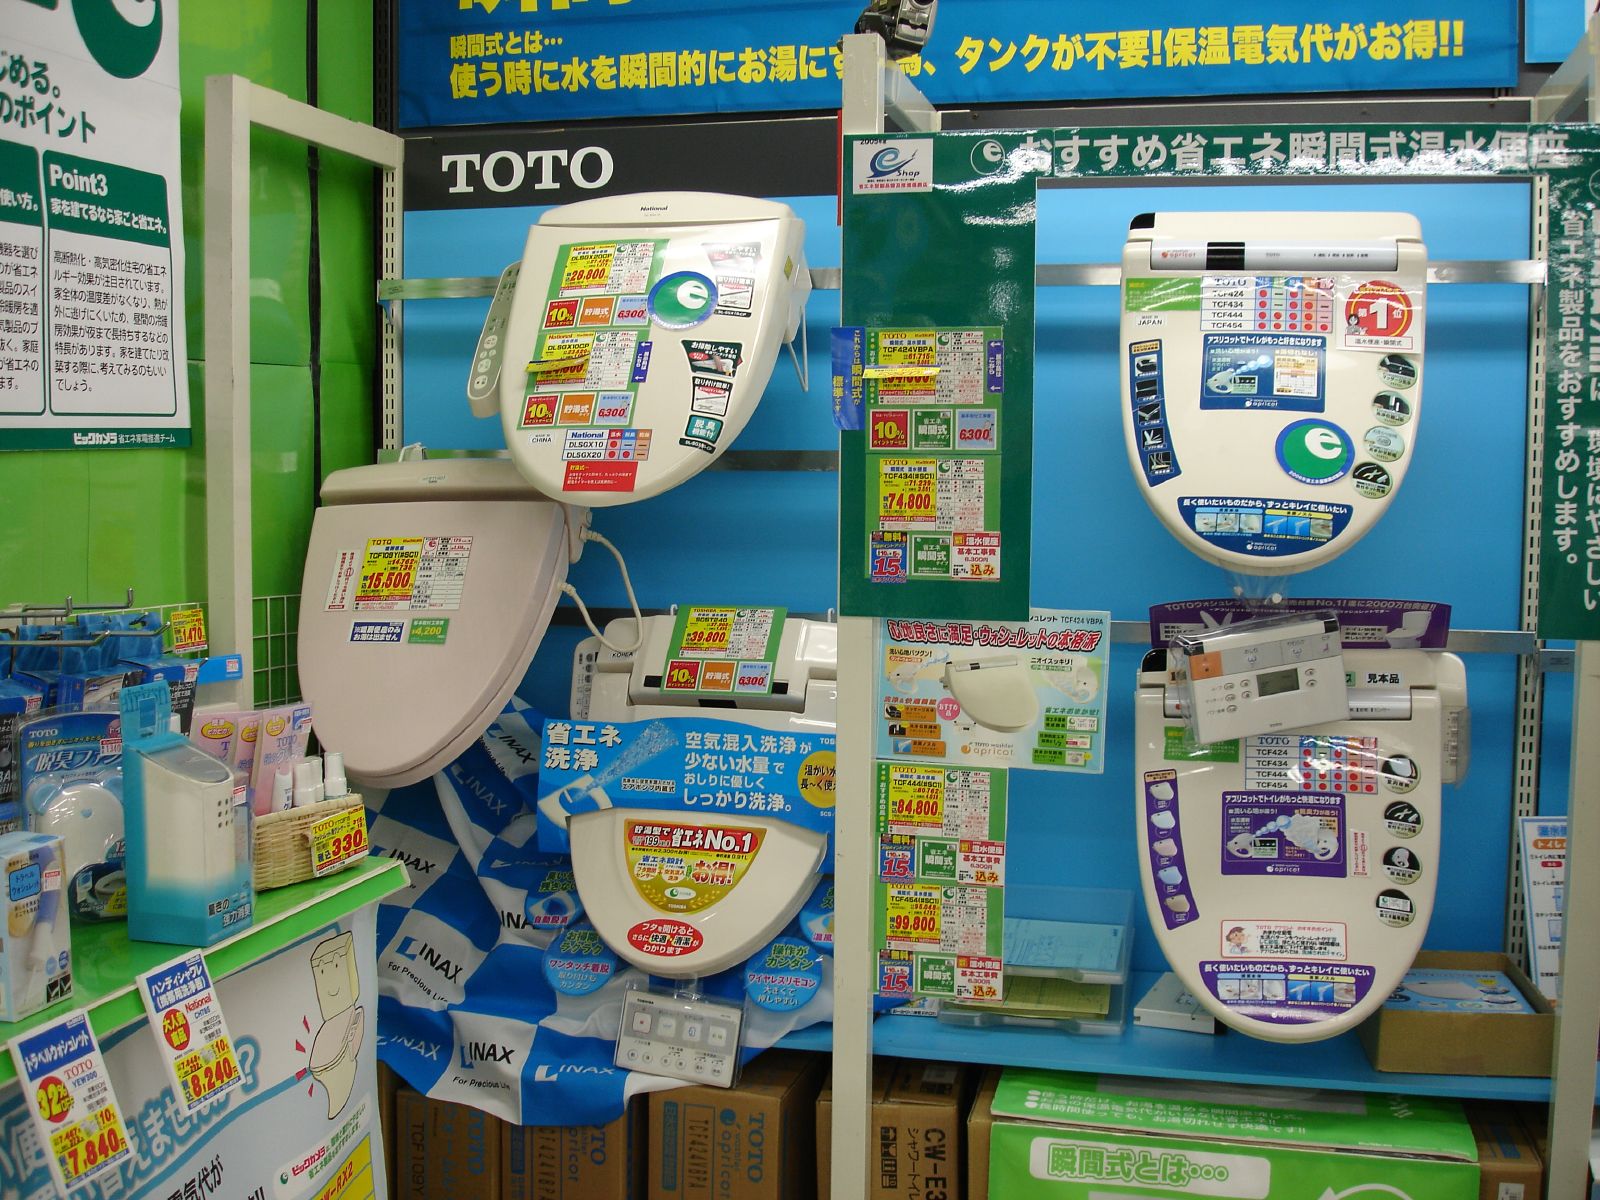 a store with two japanese toilets attached to the wall